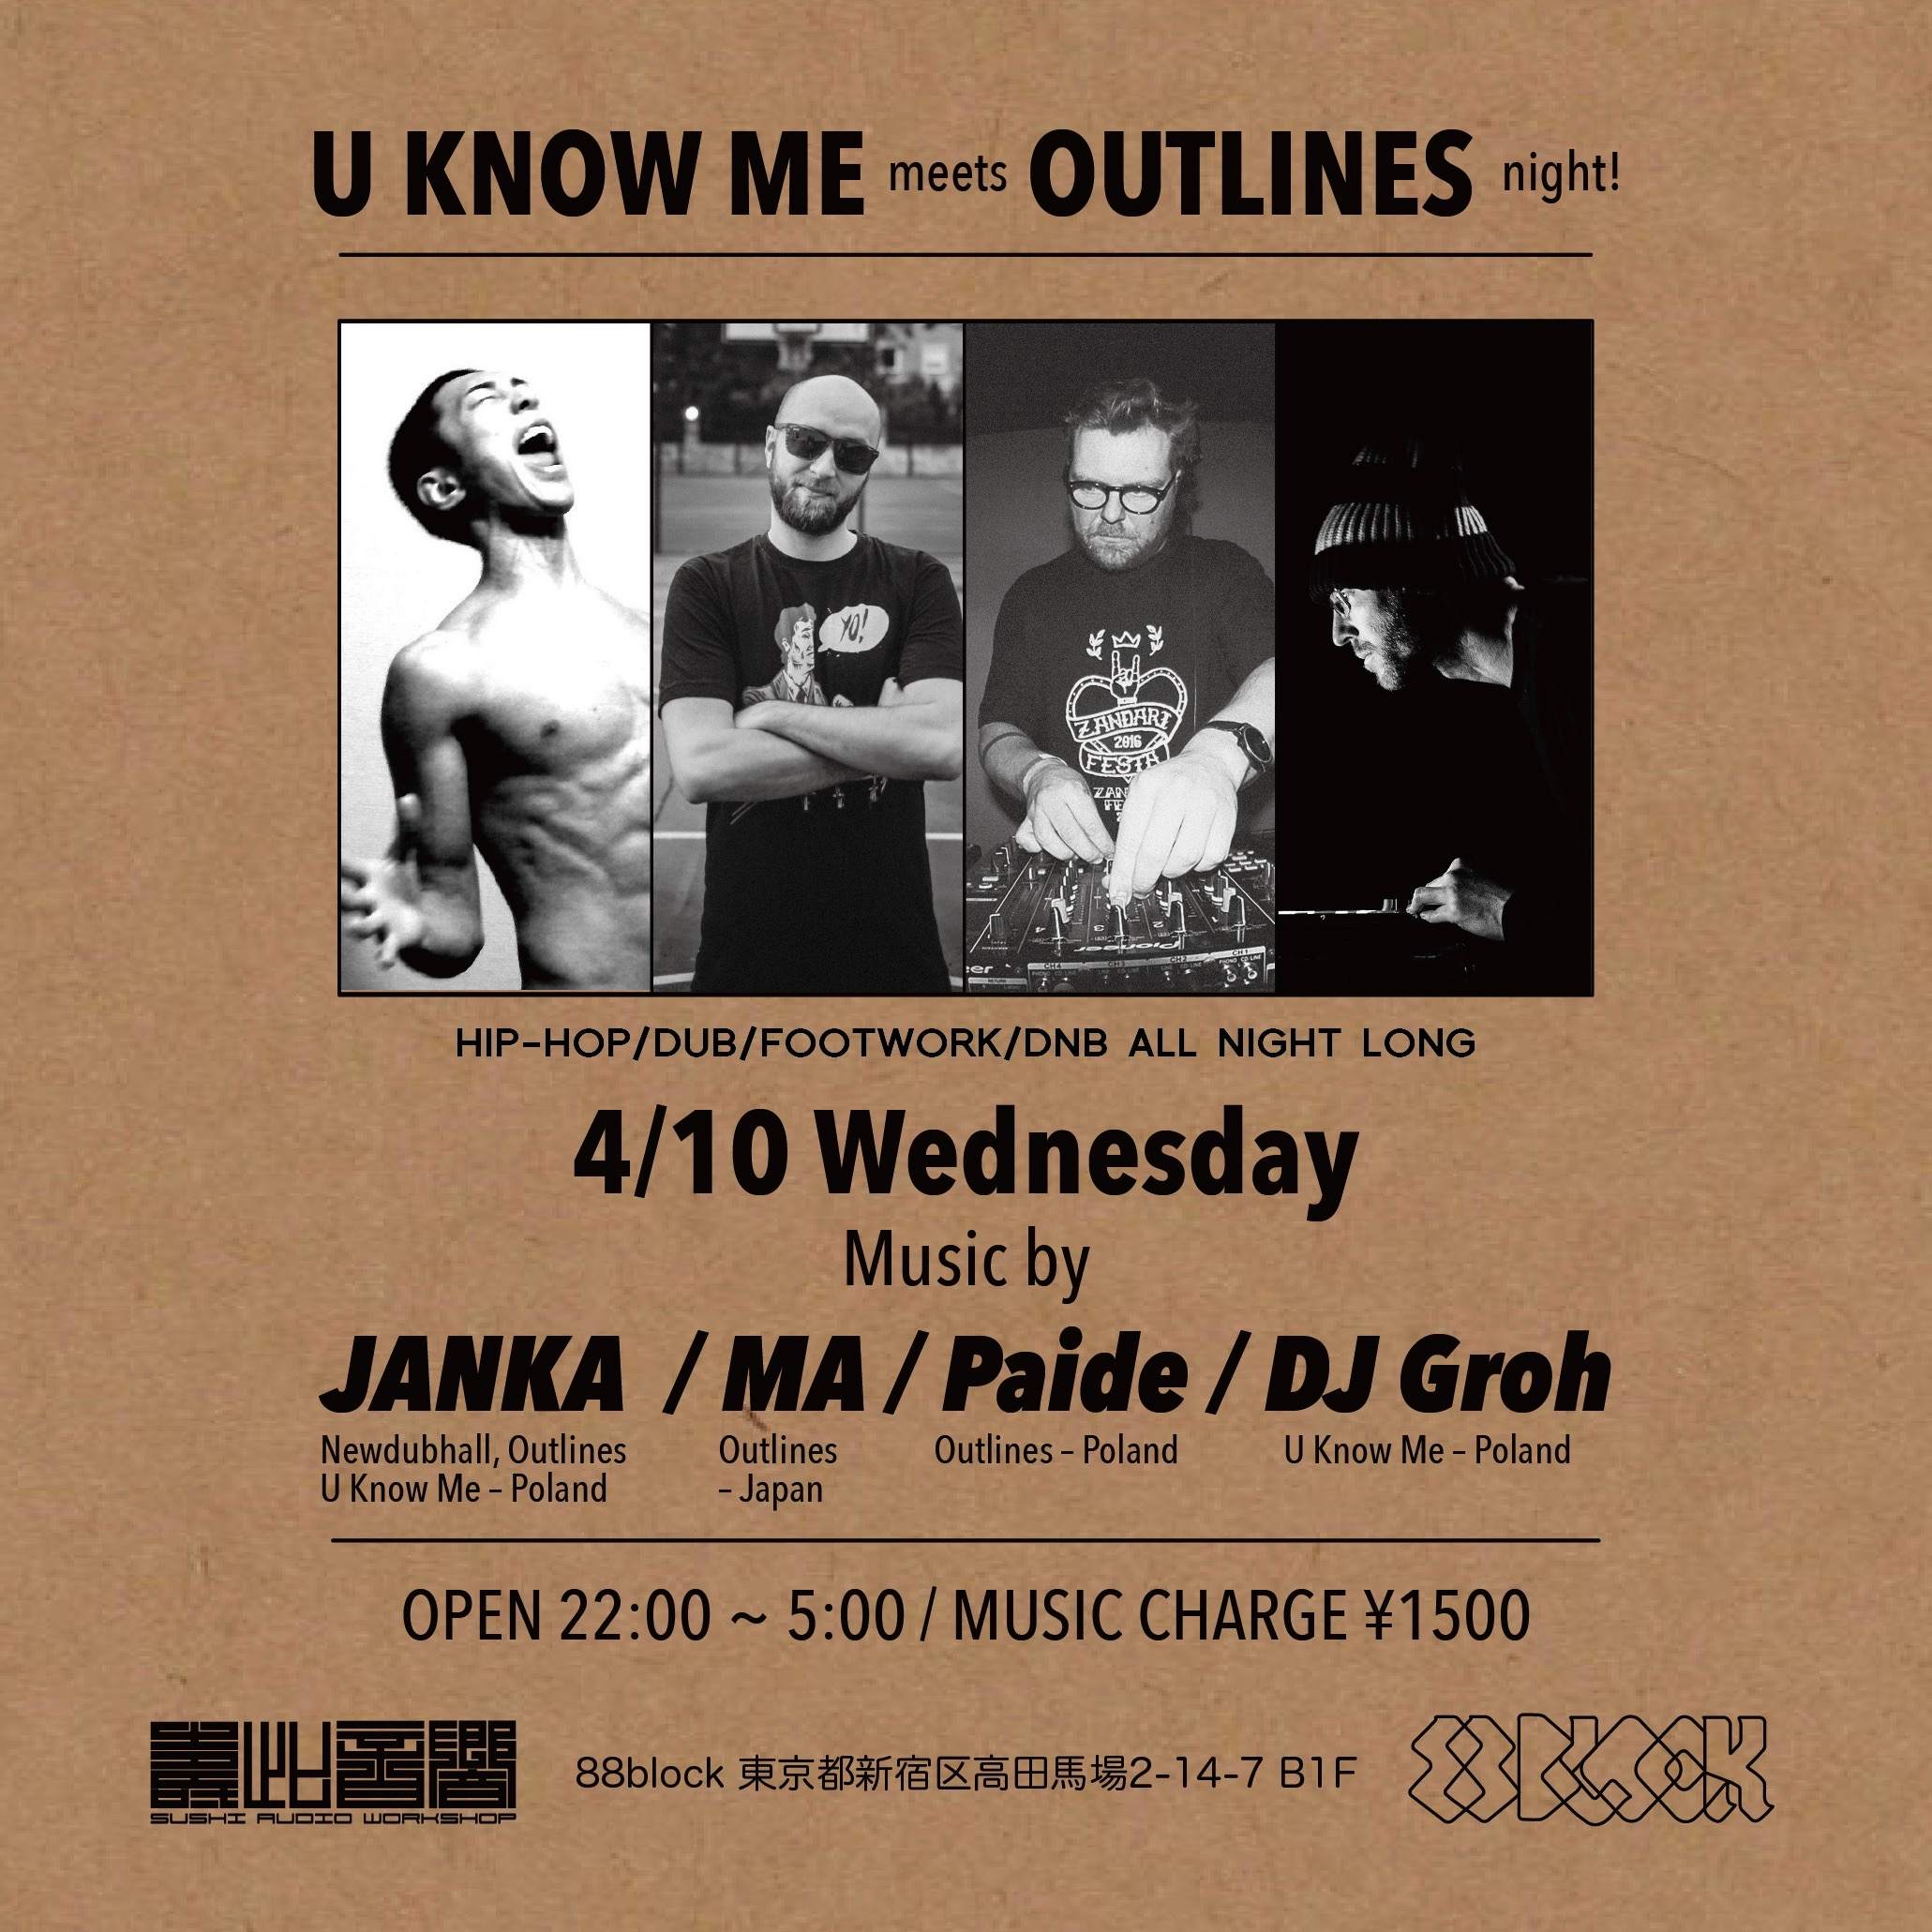 U KNOW ME meets OUTLINES night - フライヤー表